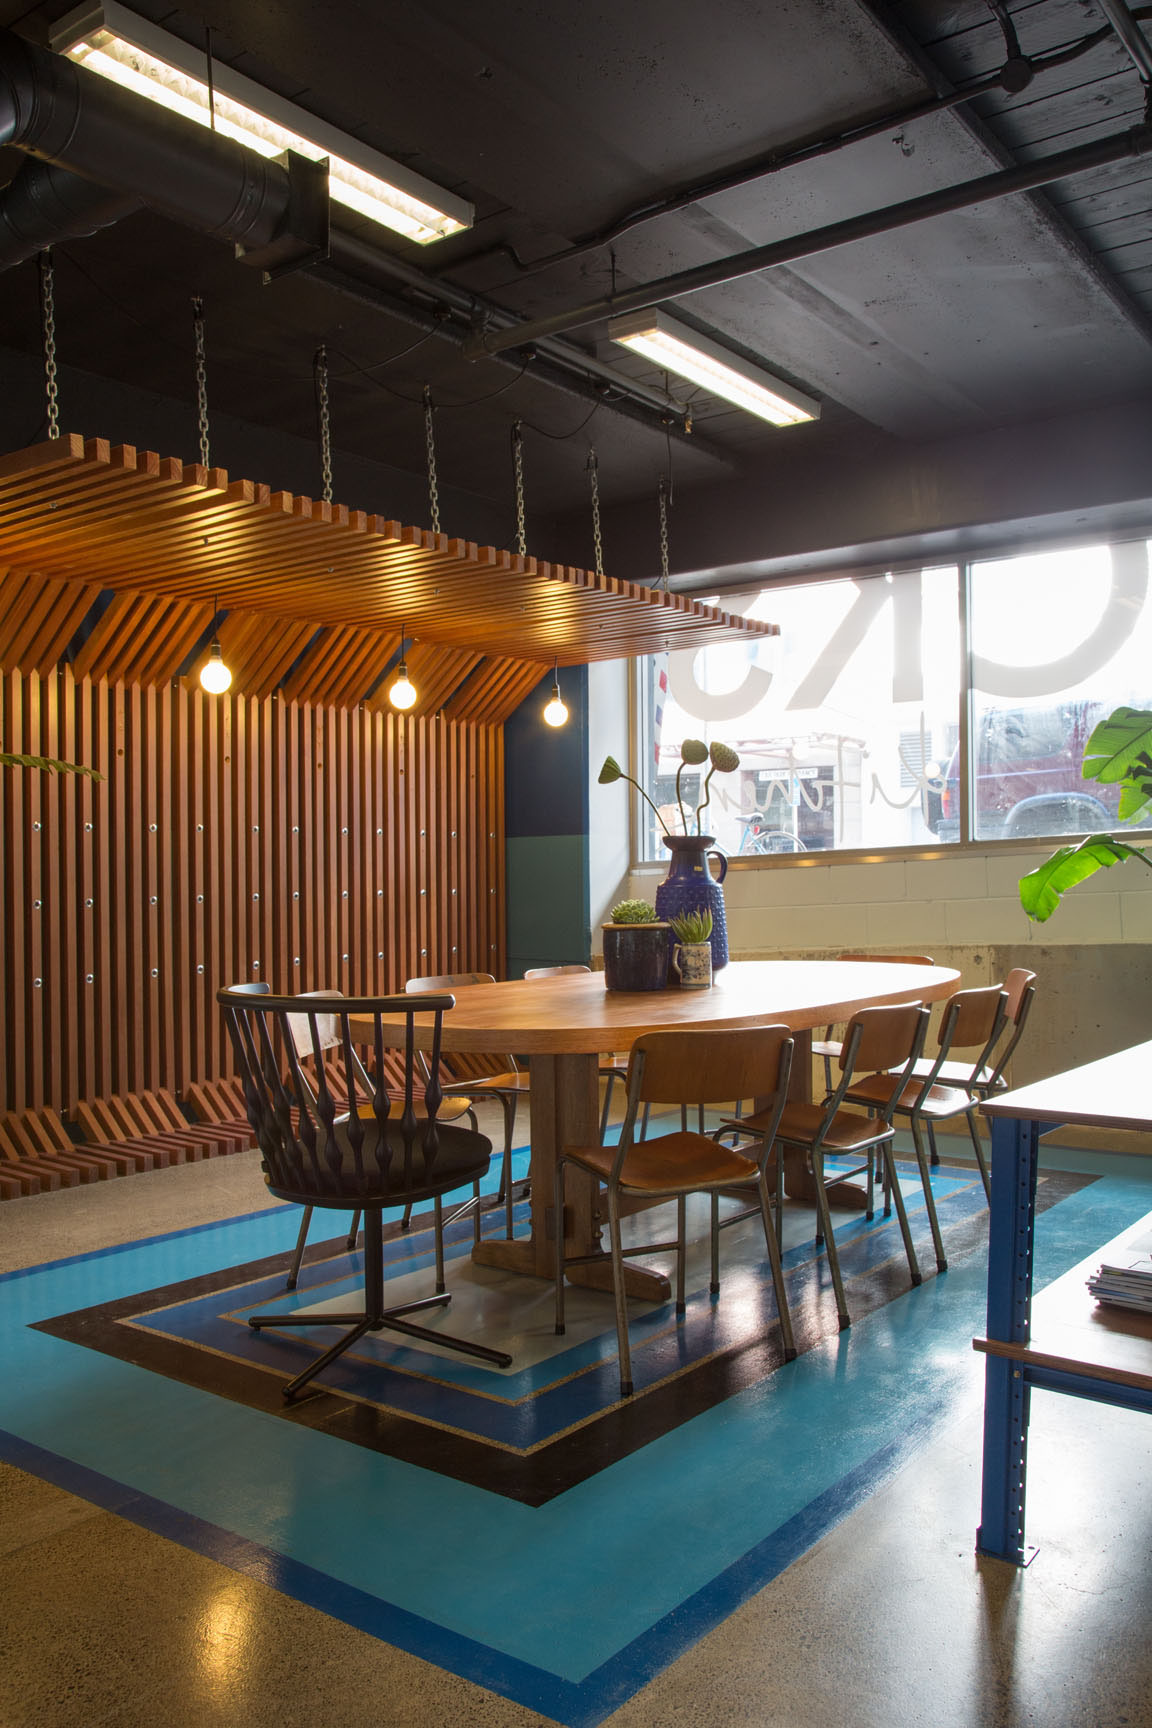 Interior furniture cafe Hospitality RECYCLED recycled timber auckland New Zealand CBD